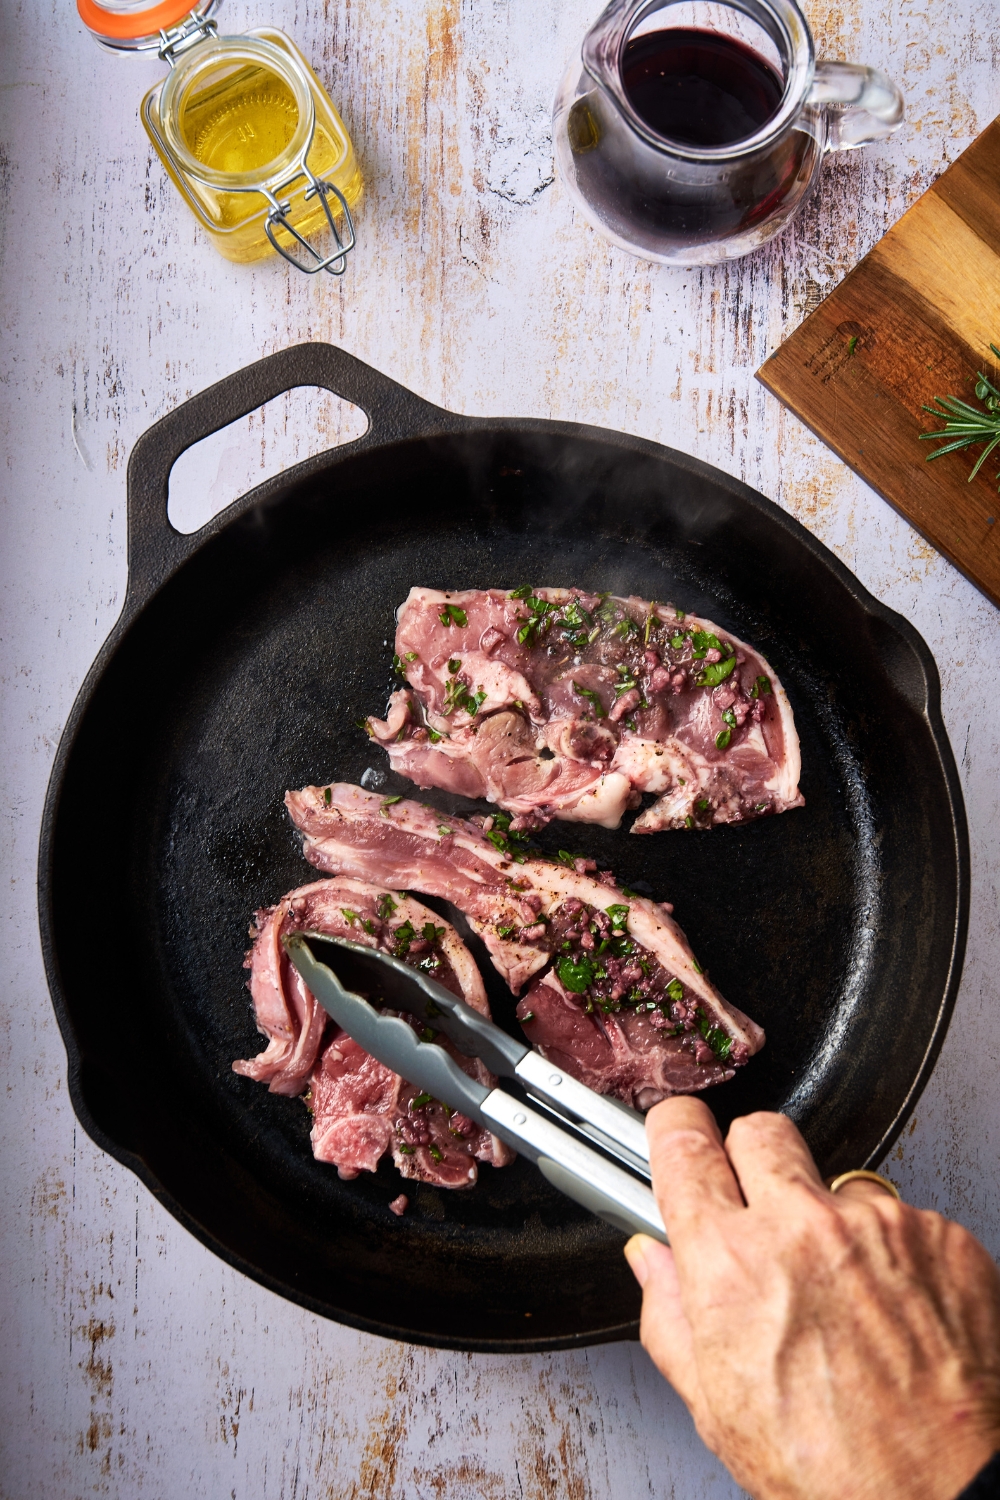 Someone presses lamb shoulder chops into a black cast iron pan. The chops are garnished with fresh parsley.